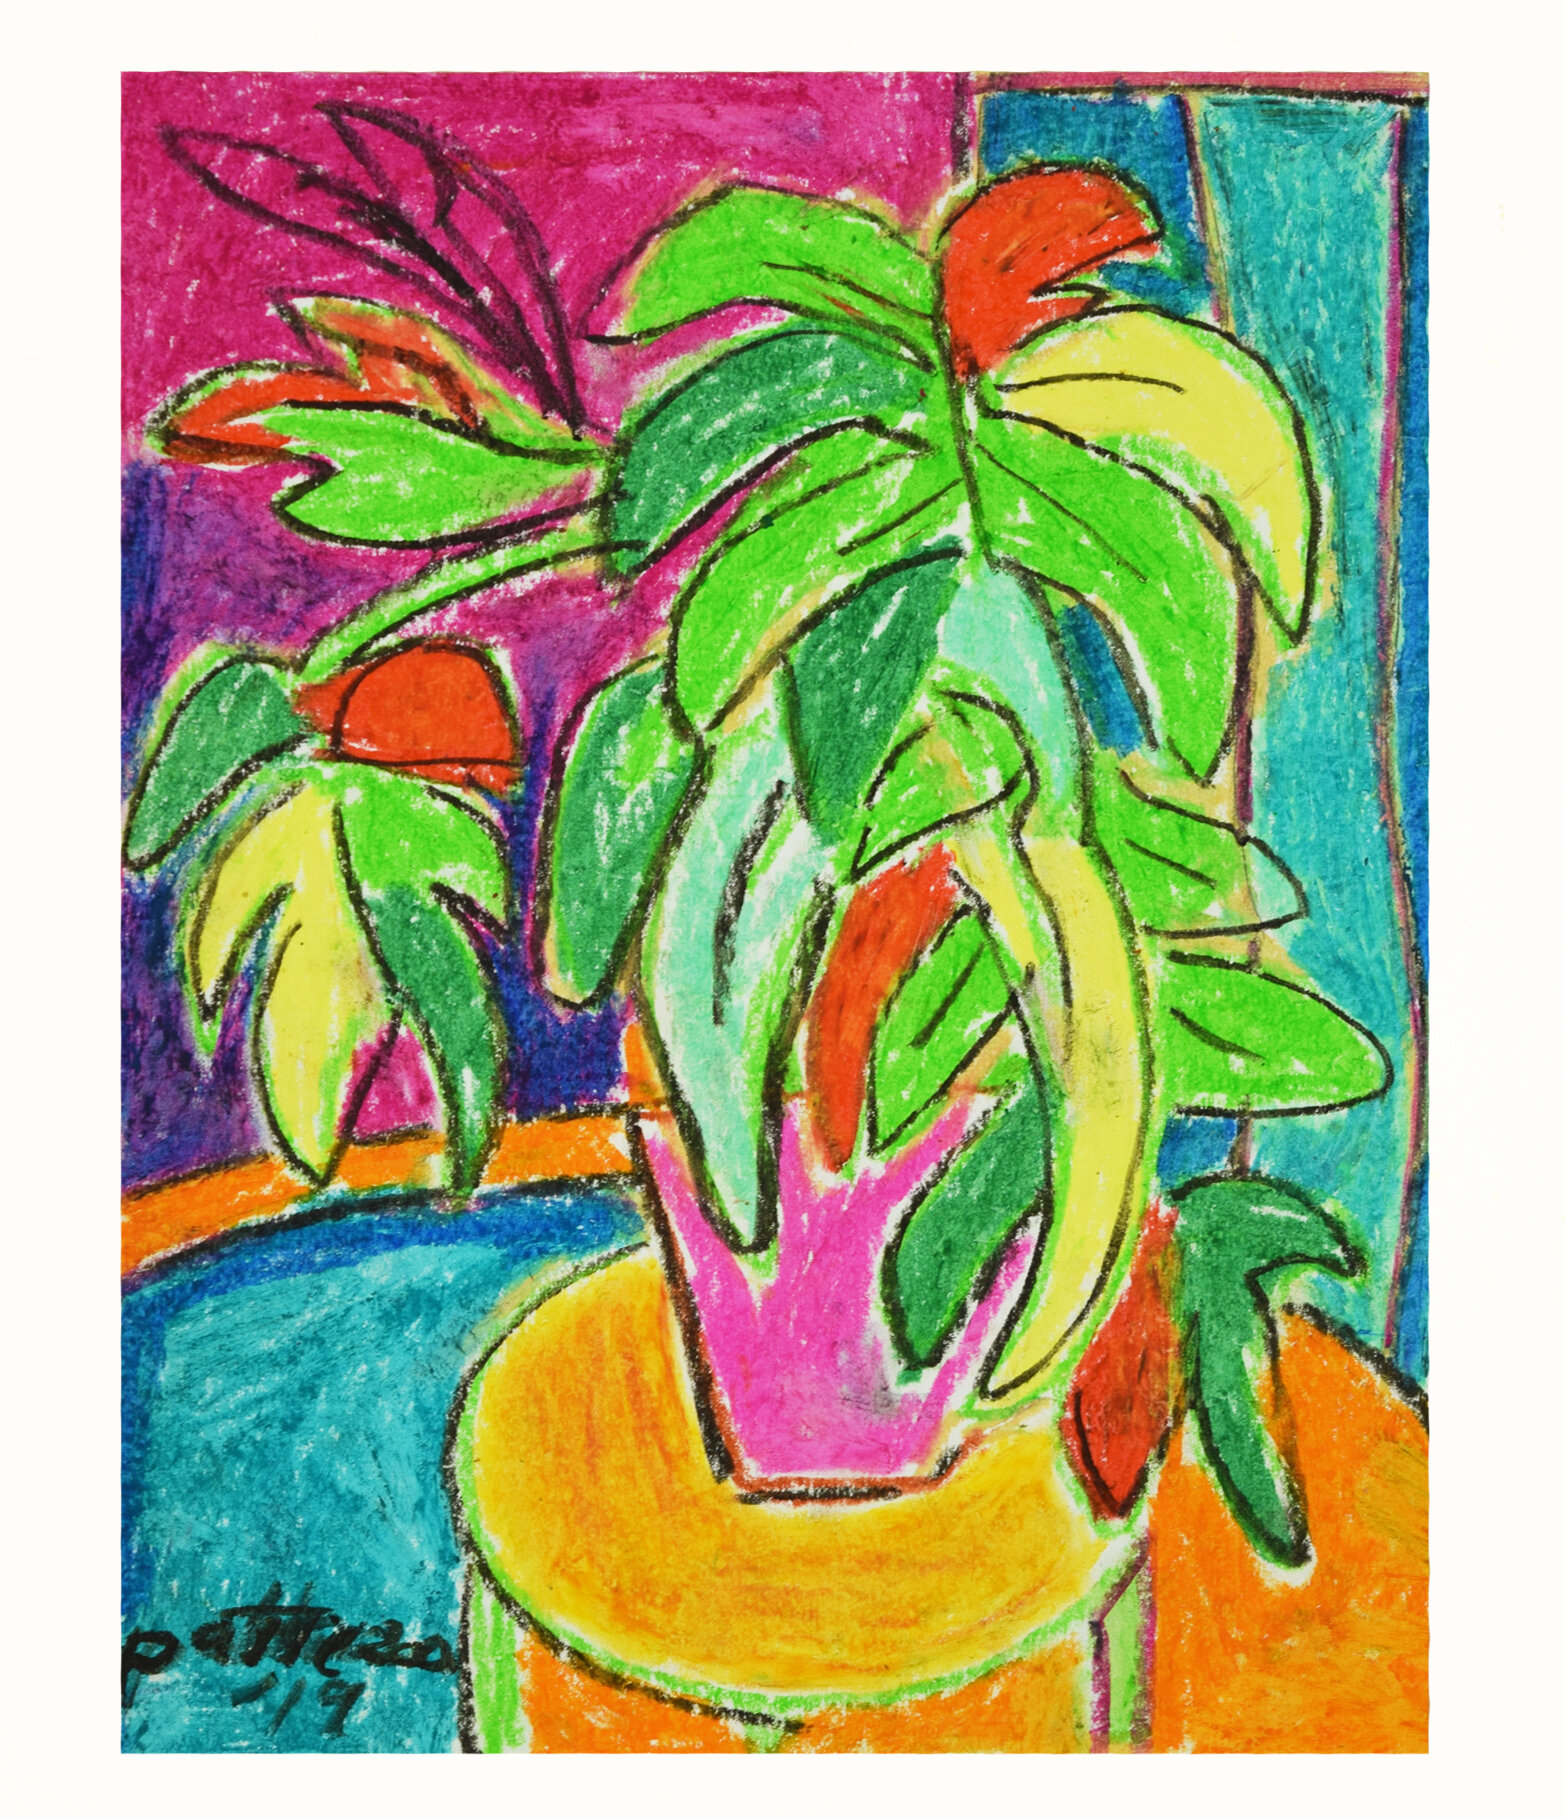 Philodendron, 2019, oil pastel on paper, 8.5 x 11 in.